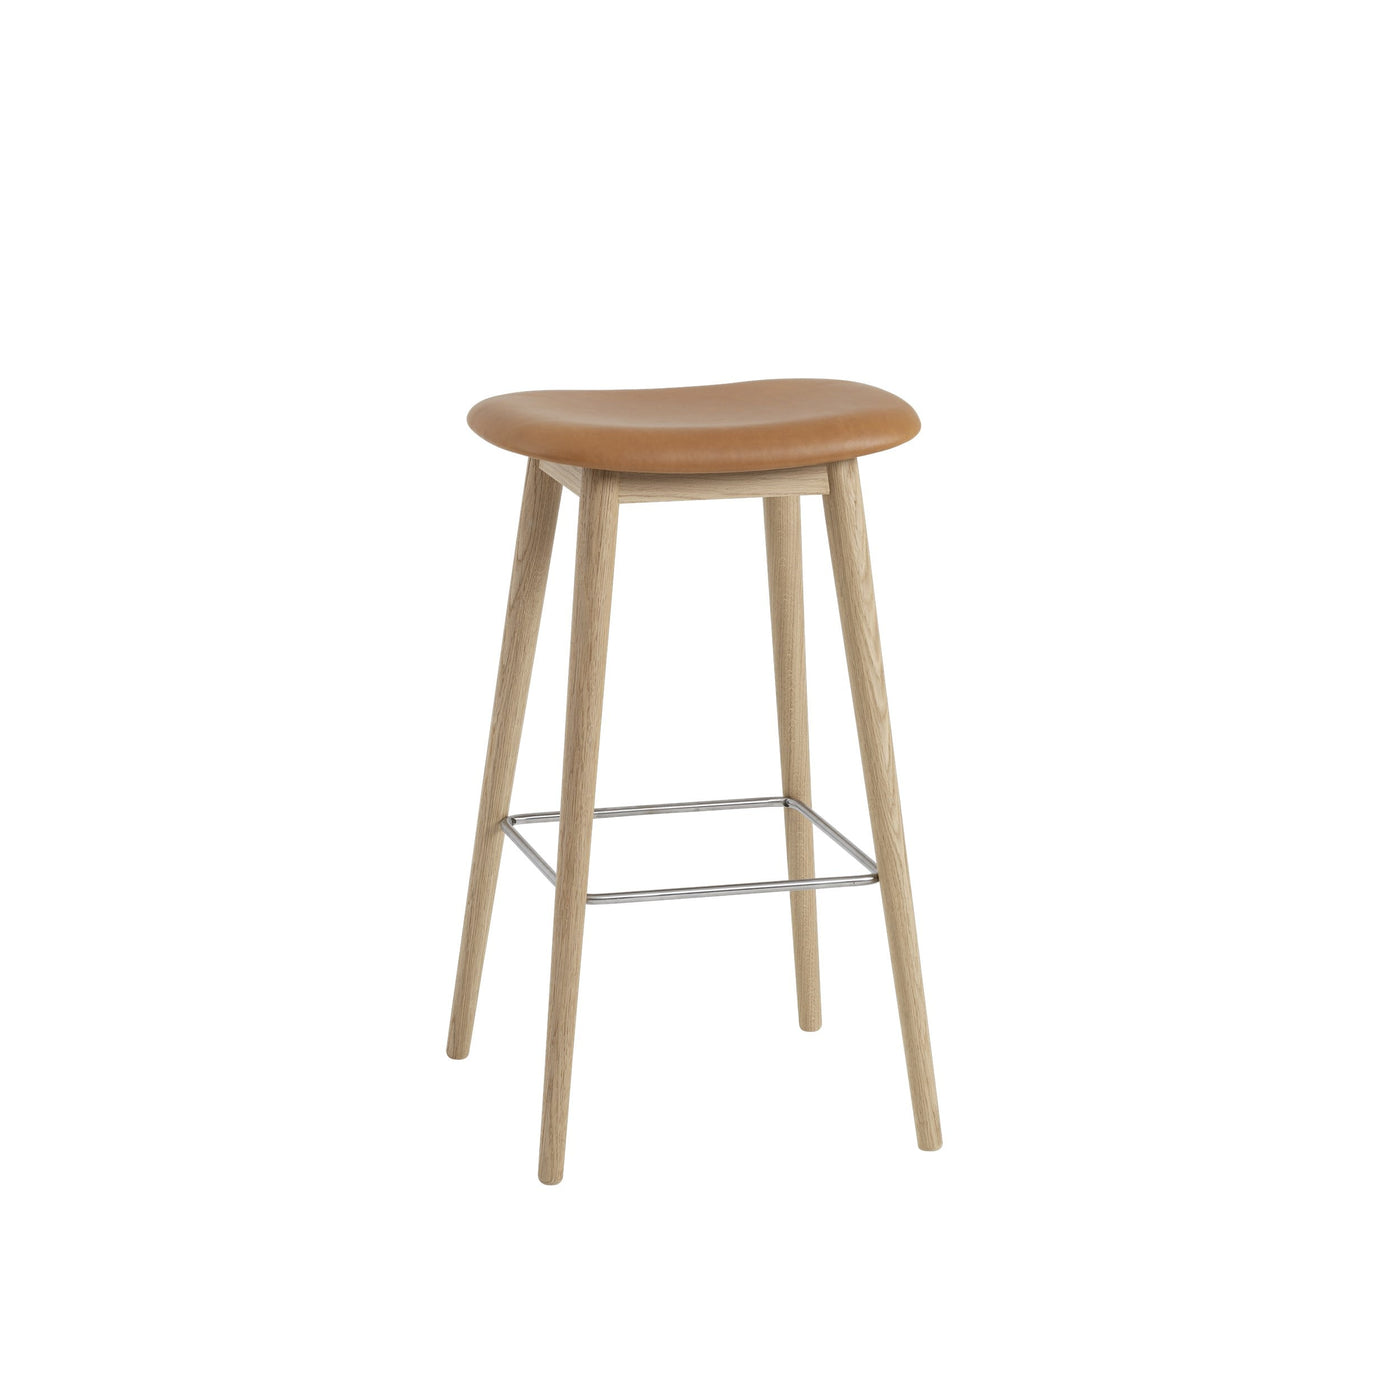 muuto fiber bar stool wood base cognac refine leather 75cm available at someday designs. #colour_cognac-refine-leather